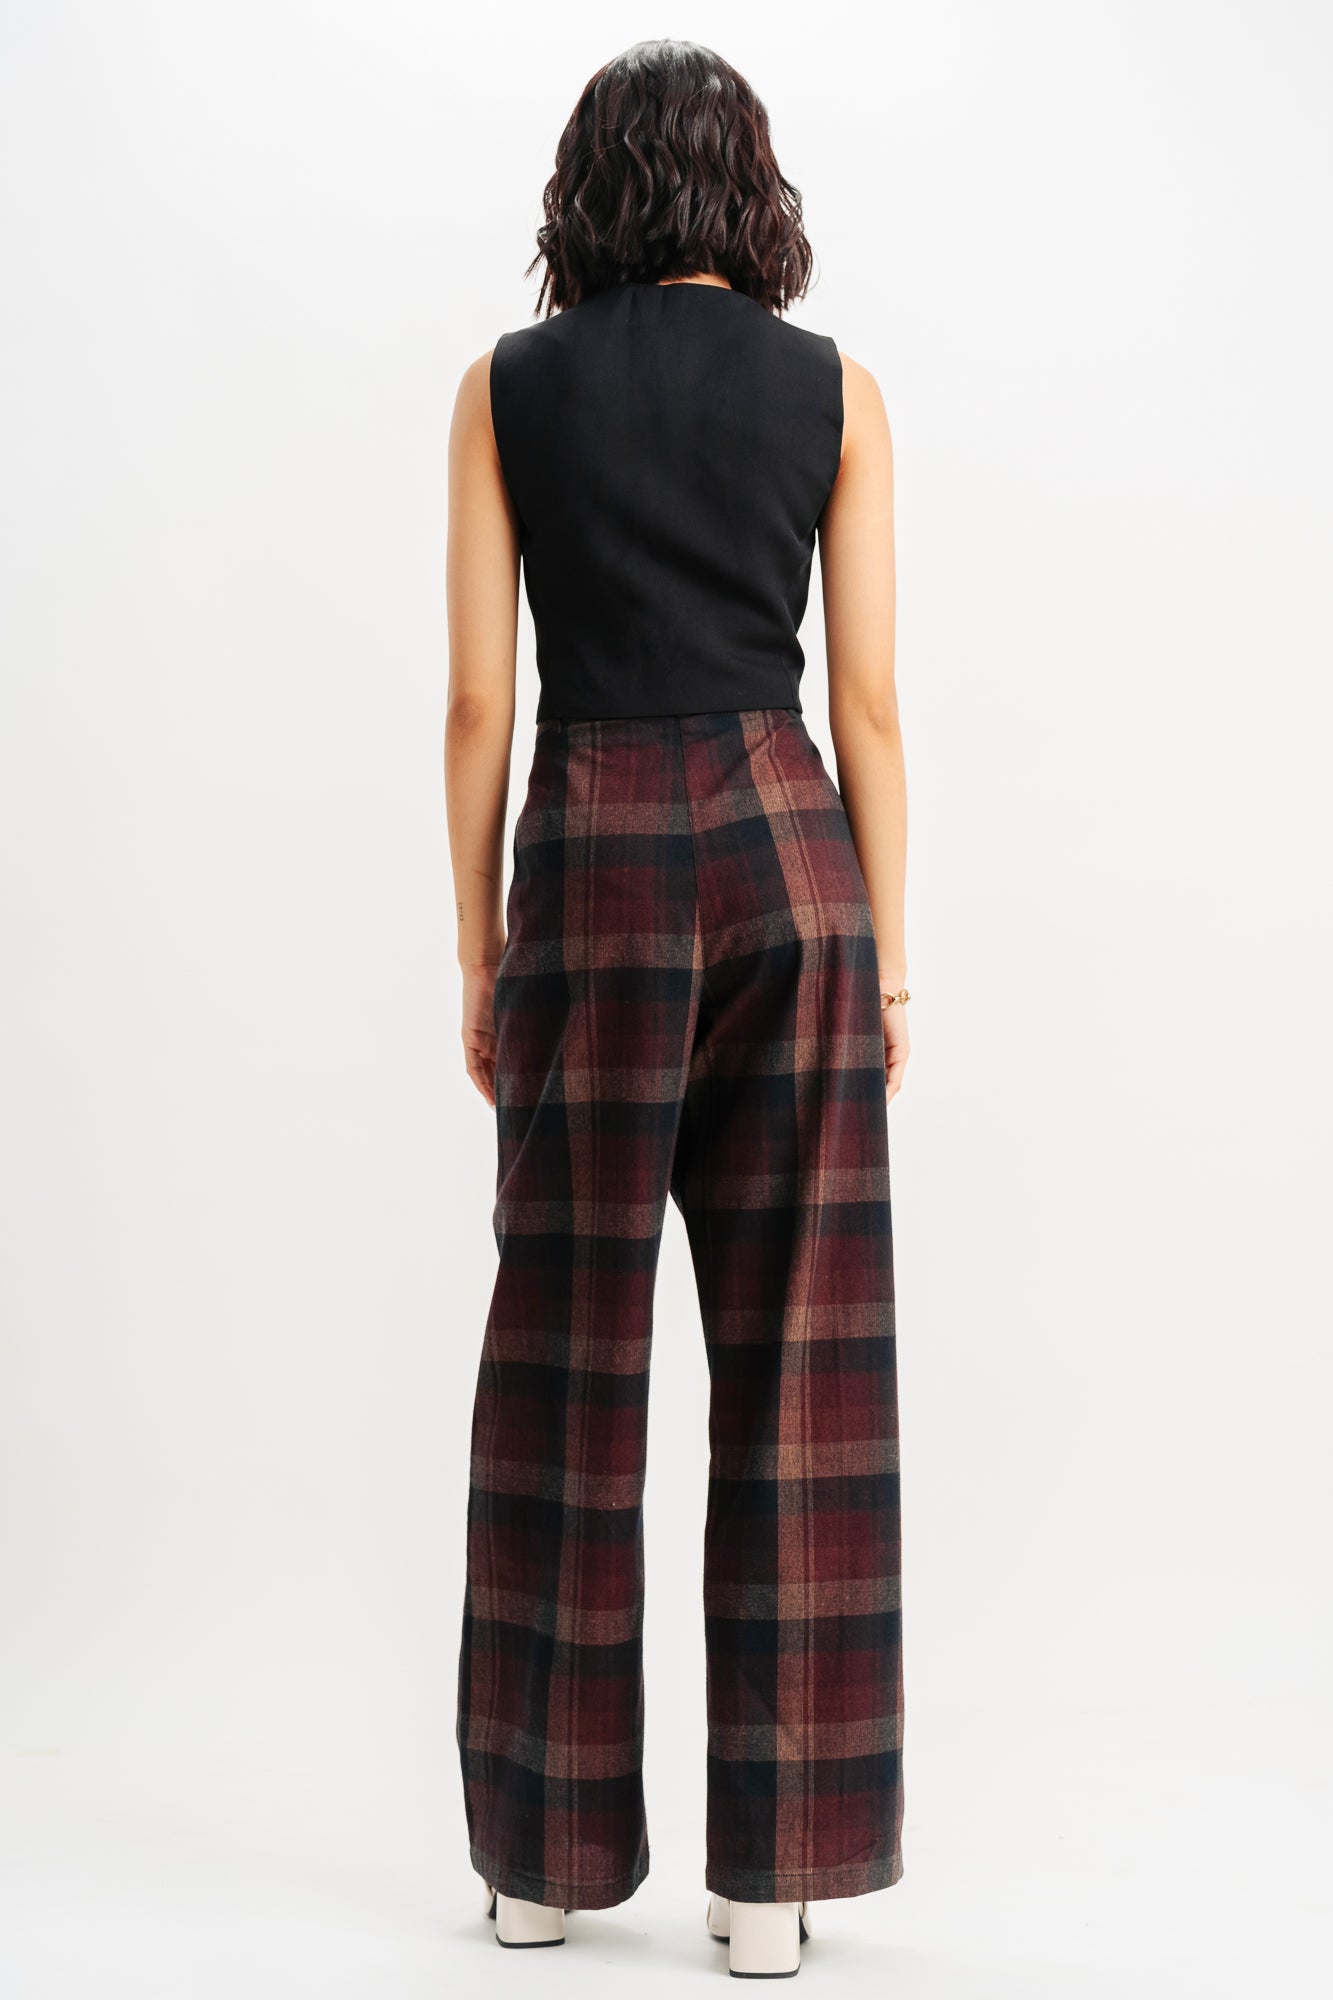 EARTHLY CHECKERED PANTS